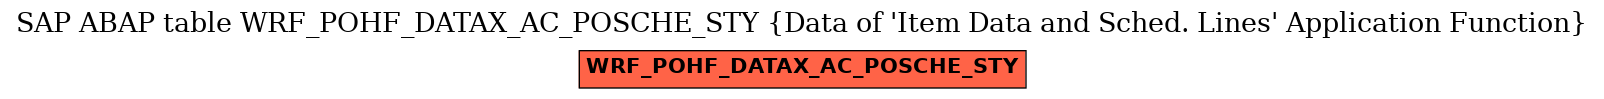 E-R Diagram for table WRF_POHF_DATAX_AC_POSCHE_STY (Data of 